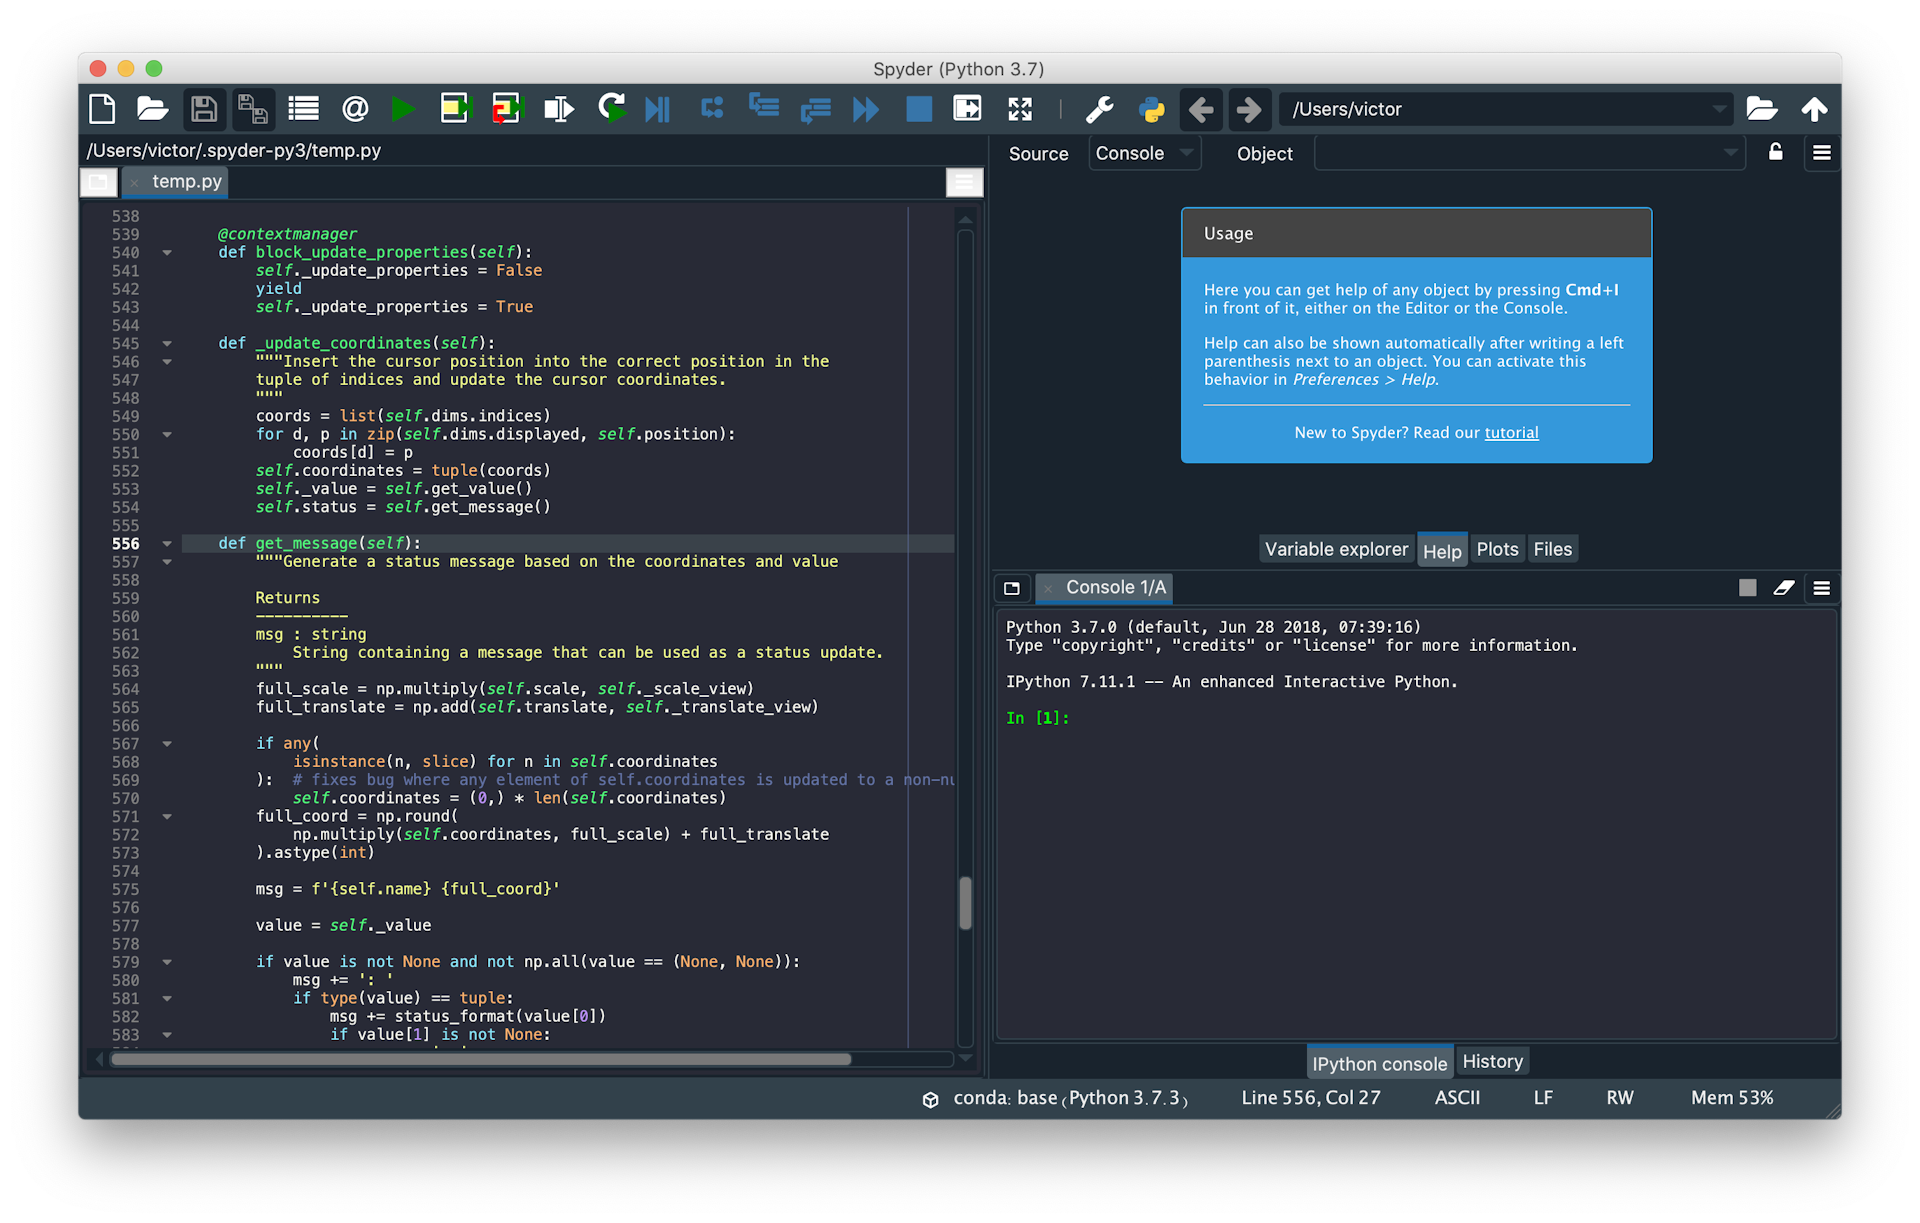 spyder-ide - Theme Preview